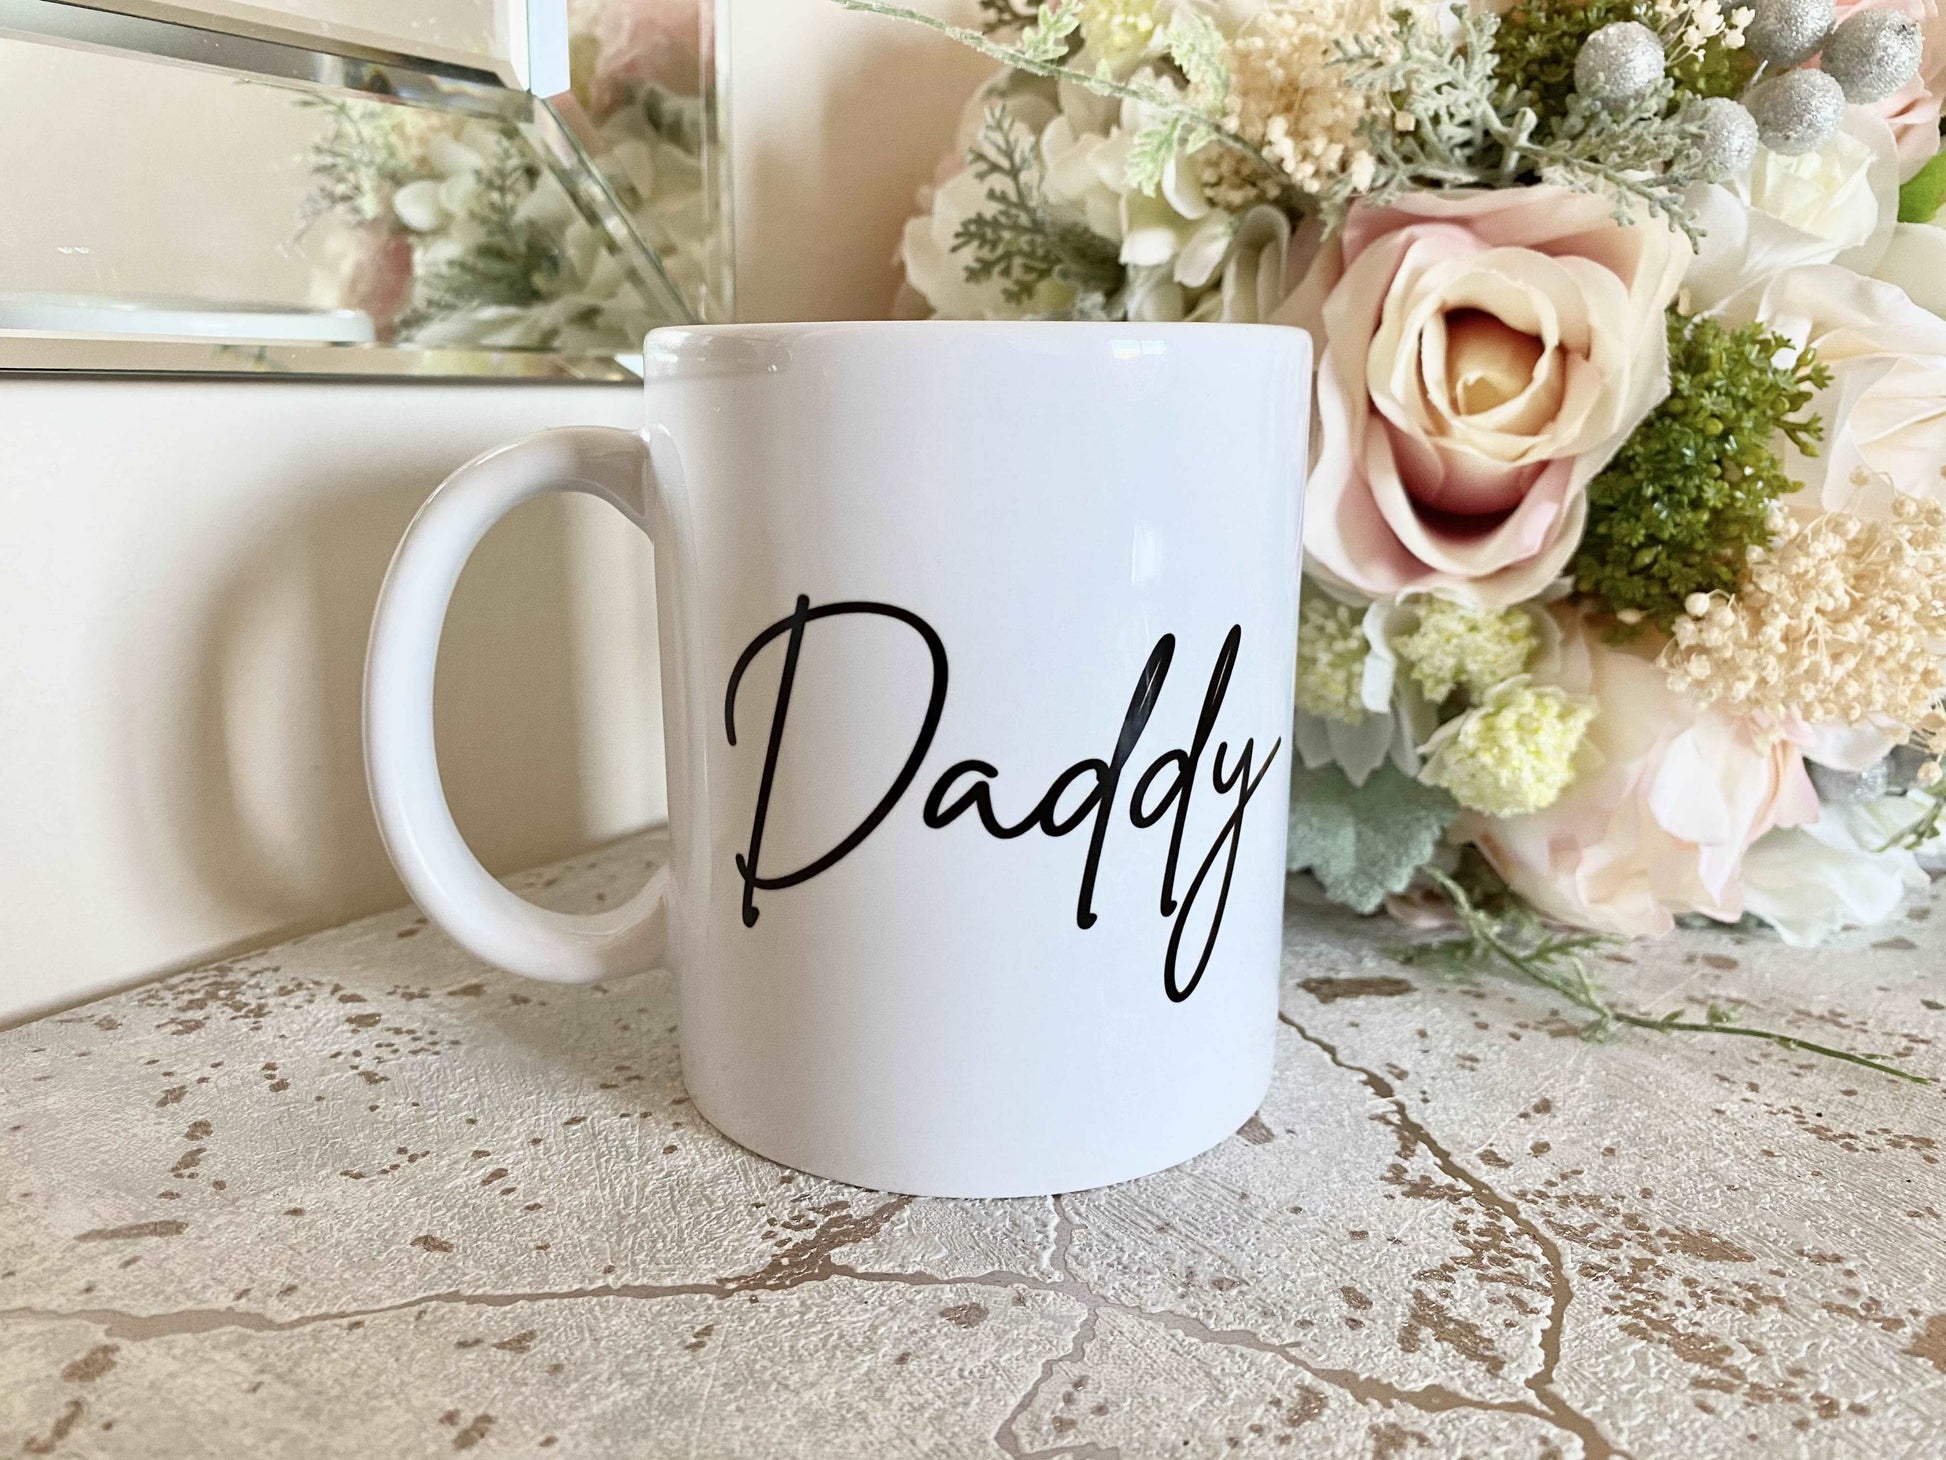 white mug with daddy printed on in a script font. the mug is on a marble effect surface with a flower bouquet behind